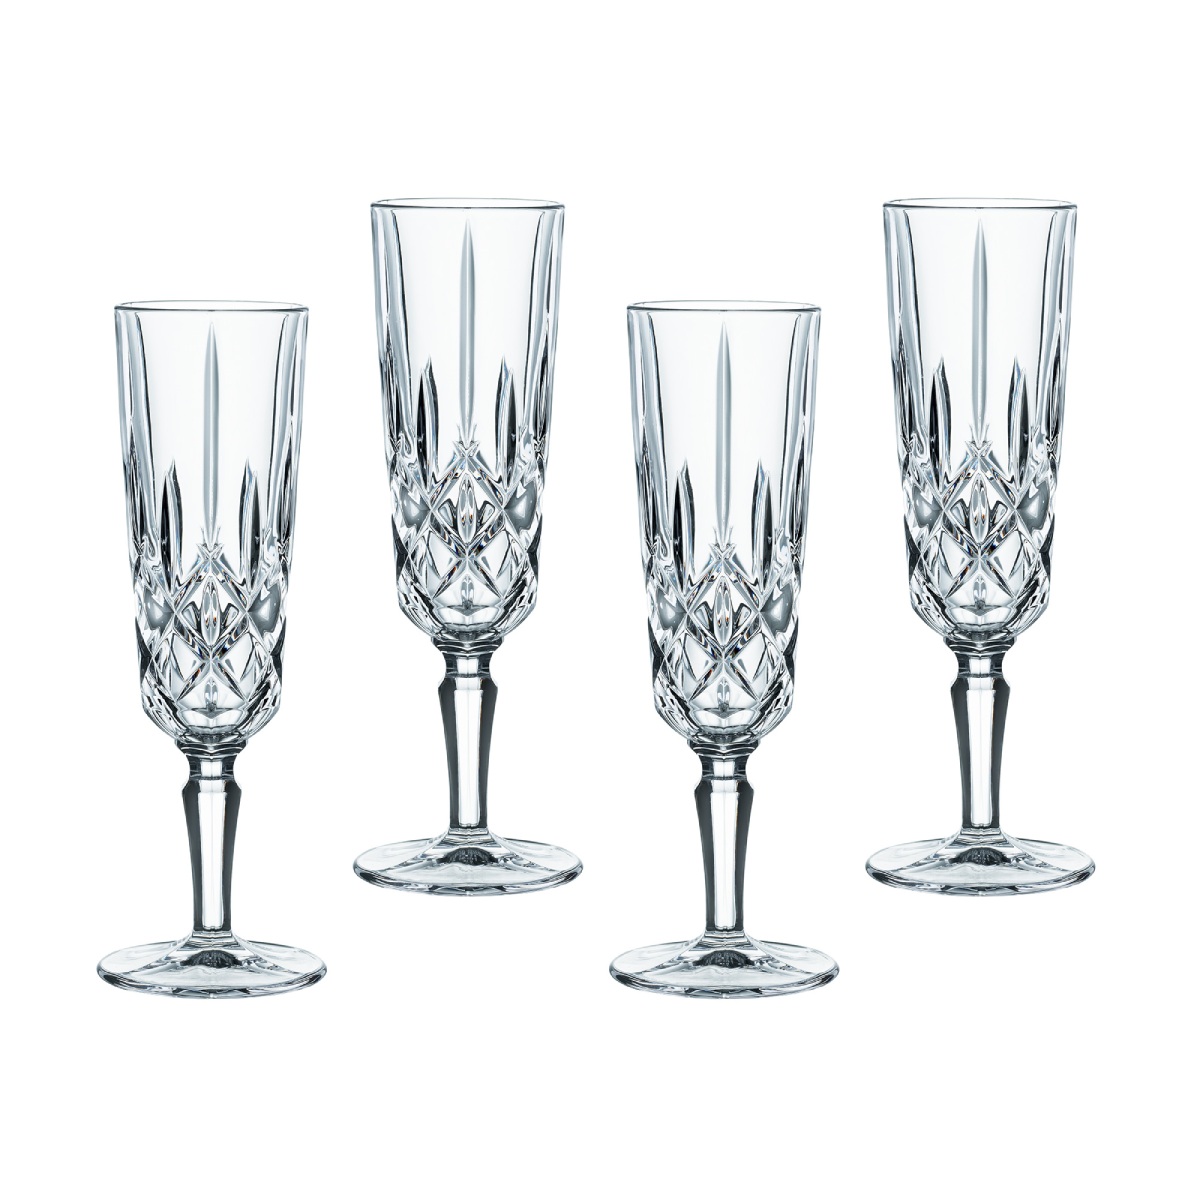 Nachtmann Noblesse Champagne Flute Set of 4 image number null